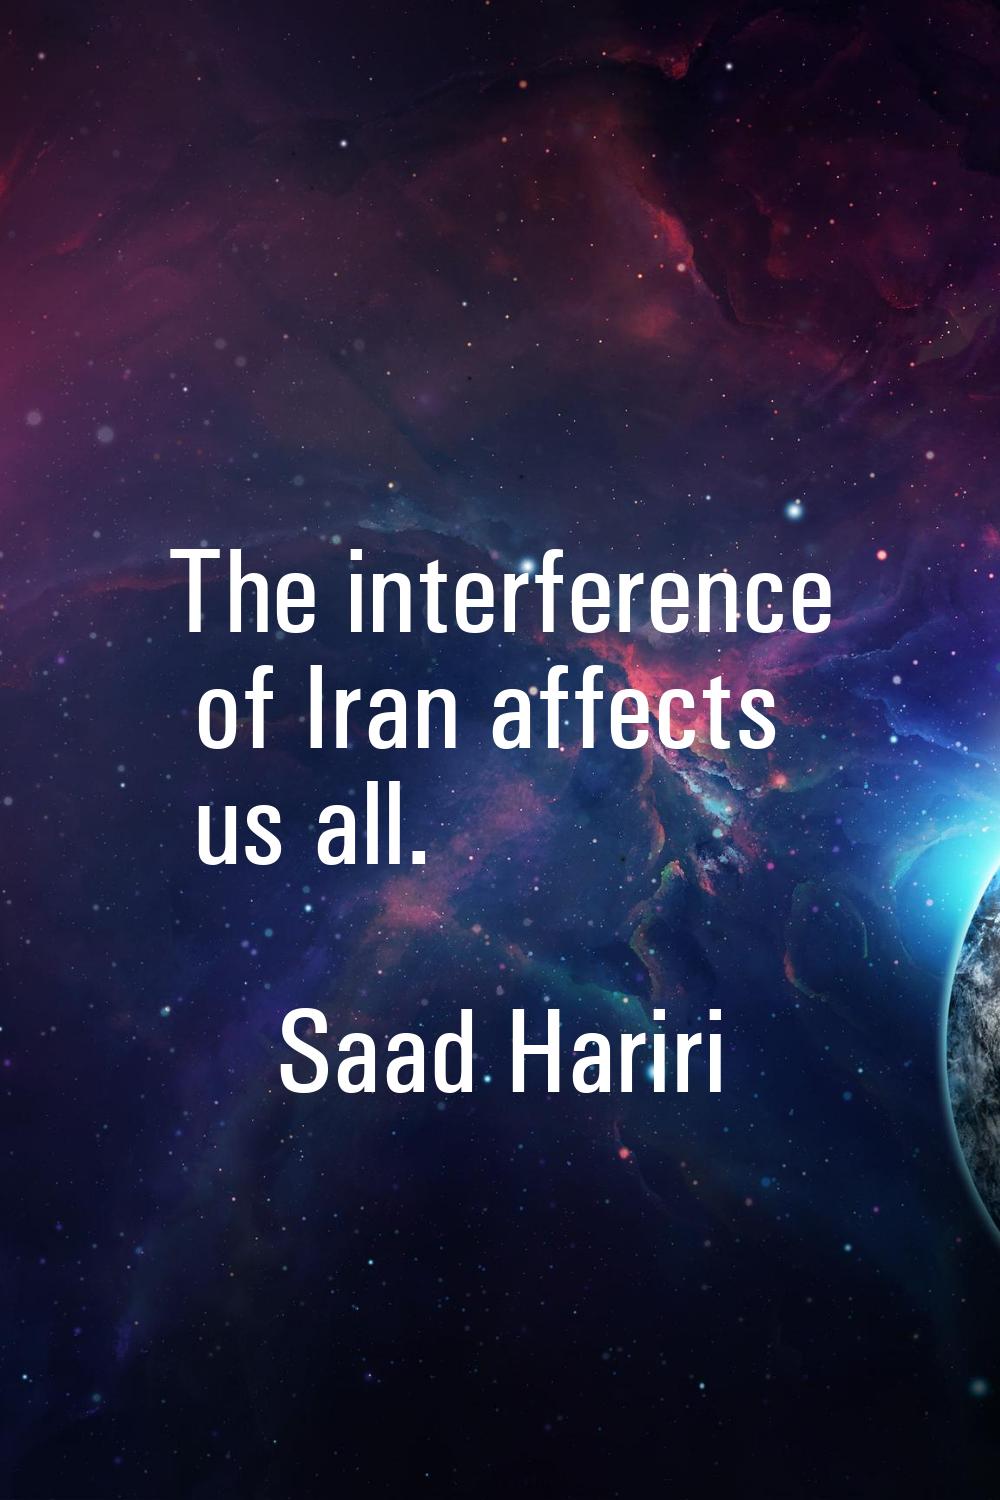 The interference of Iran affects us all.